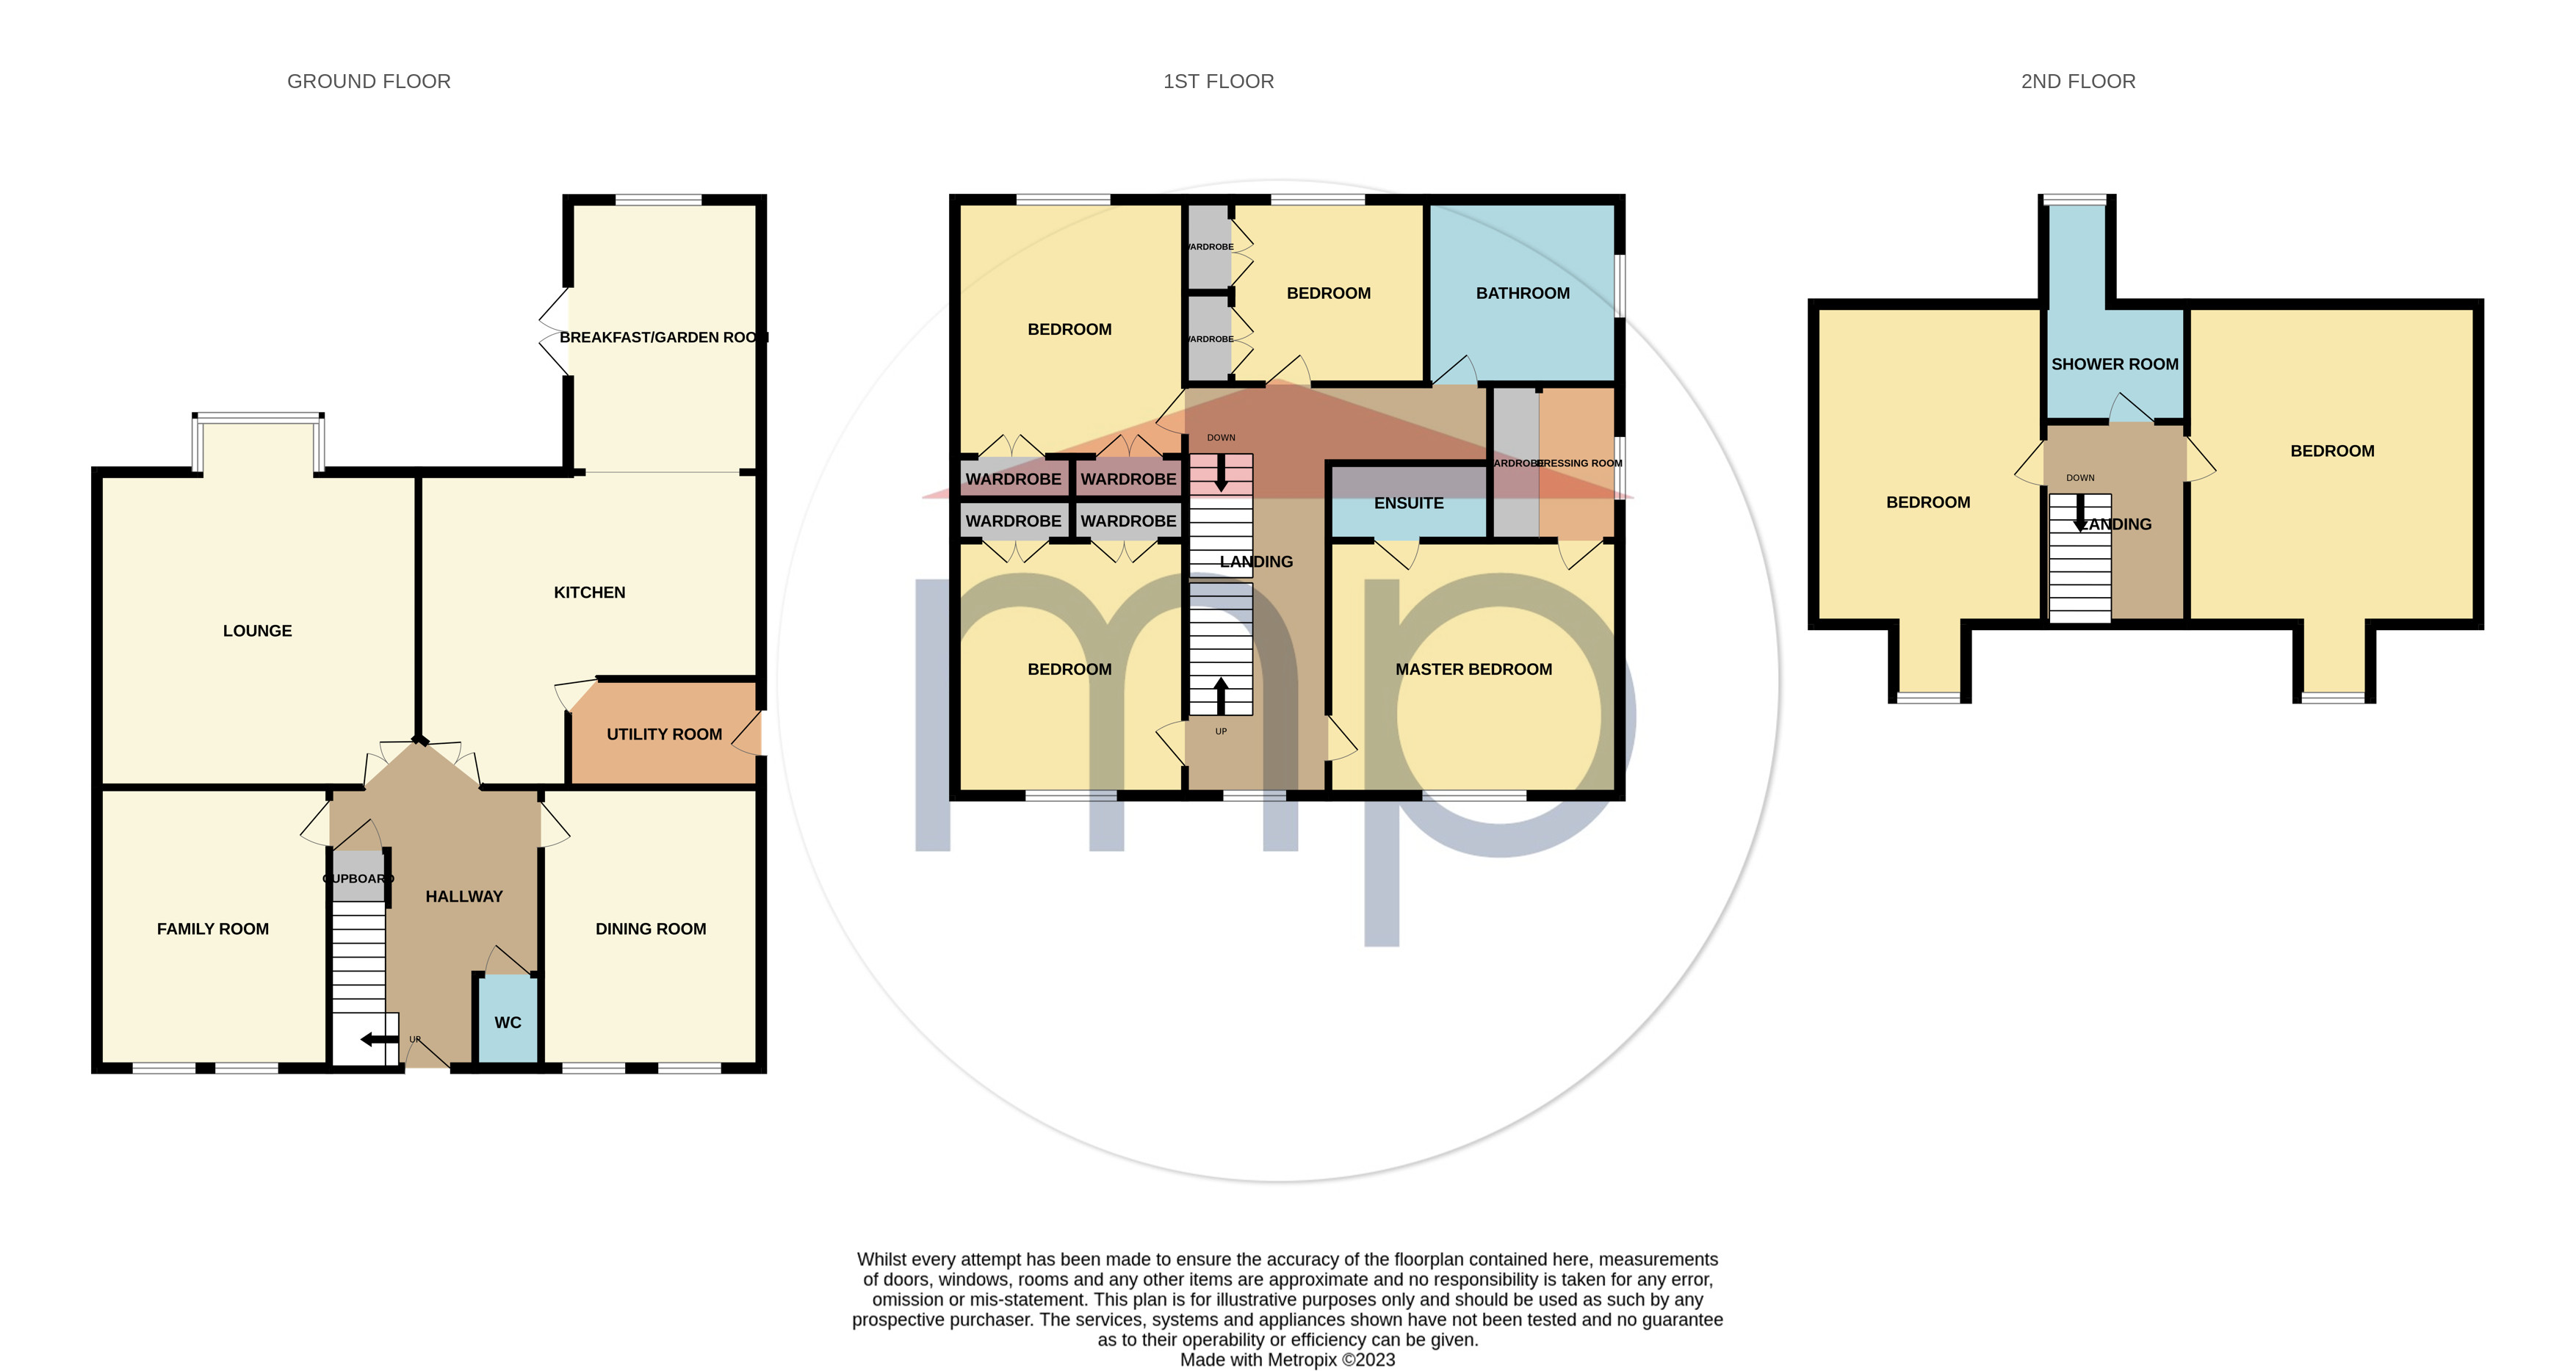 6 bed house for sale - Property floorplan